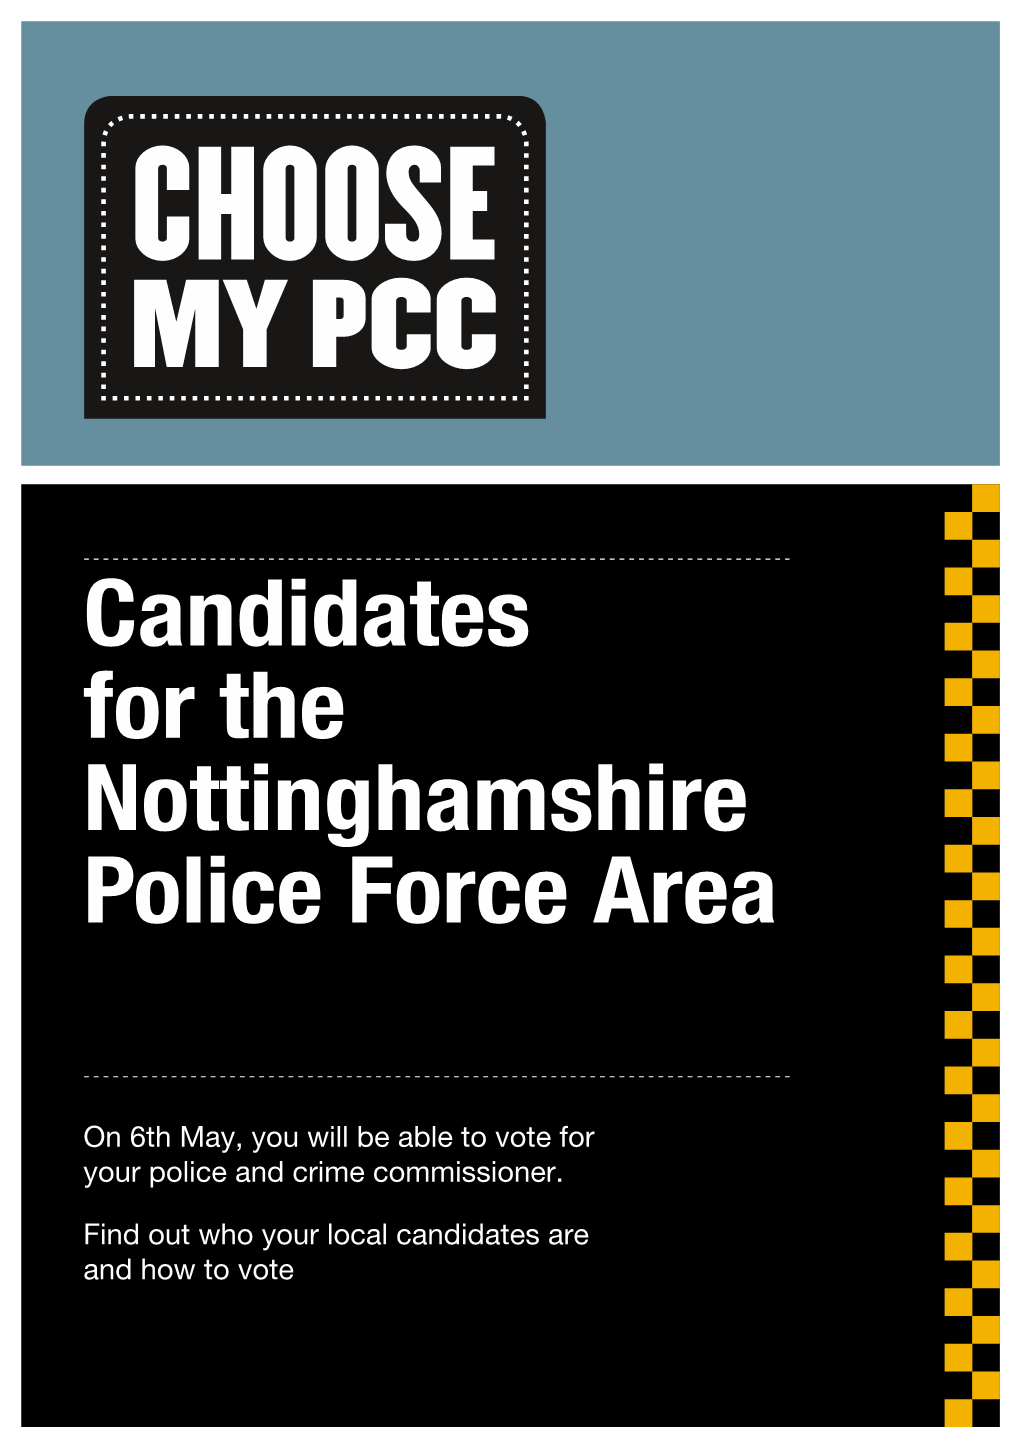 Candidates for the Nottinghamshire Police Force Area